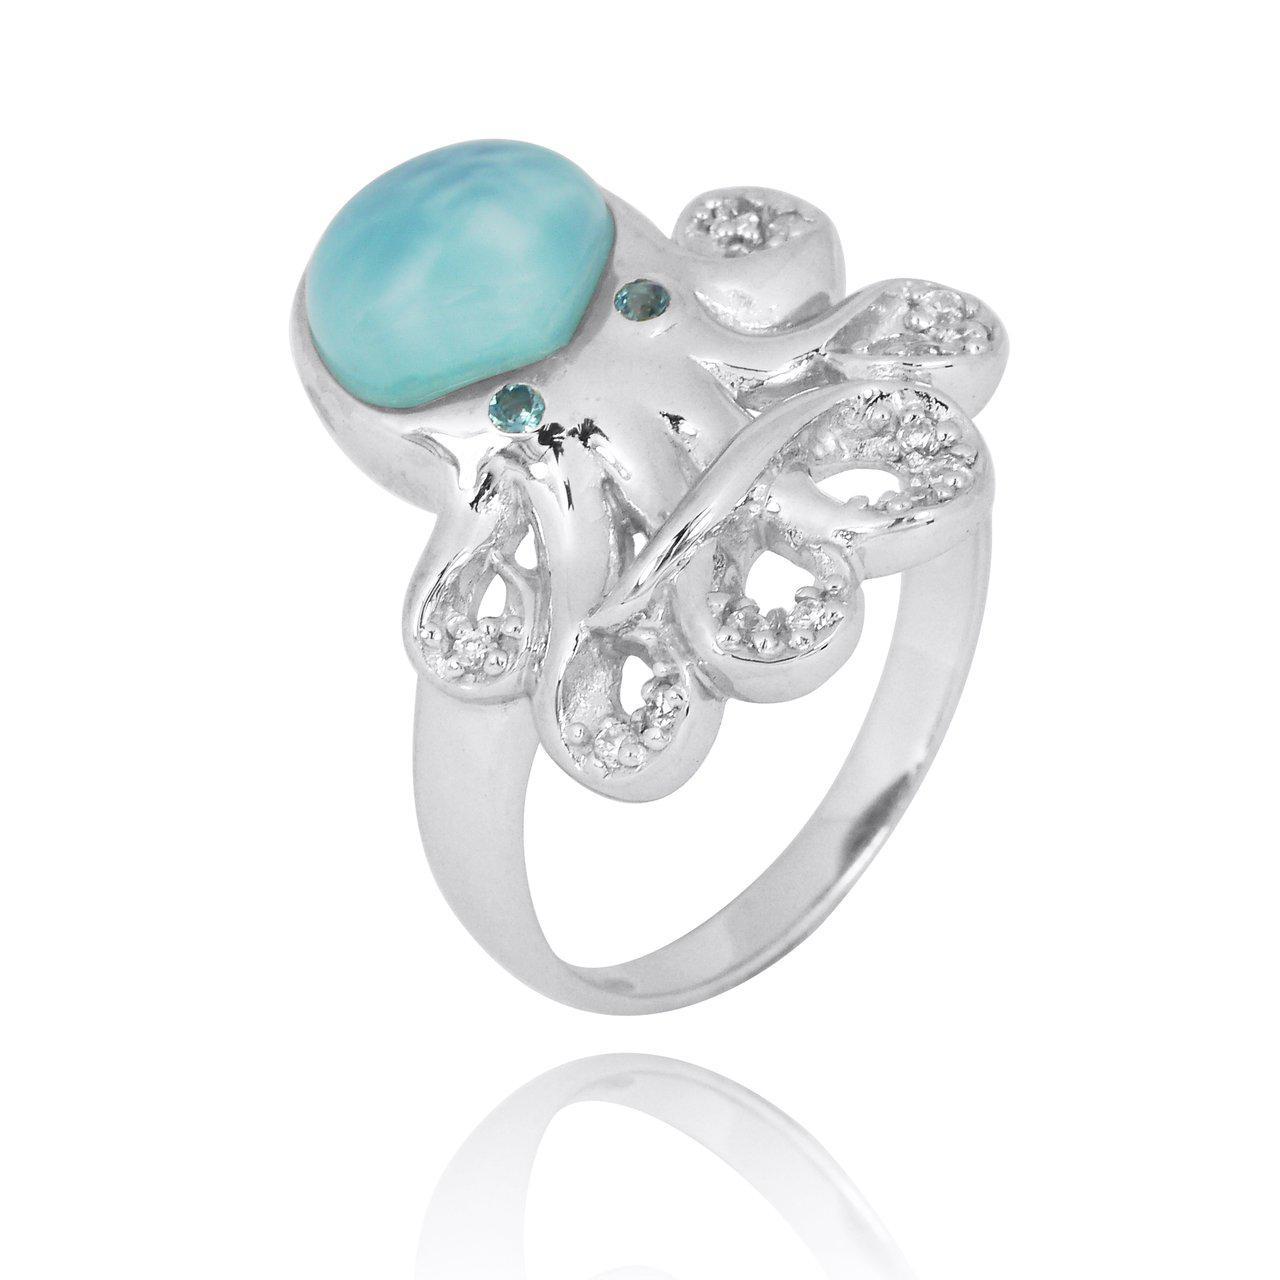 Sterling Silver Octopus Ring with Larimar and London Blue Topaz